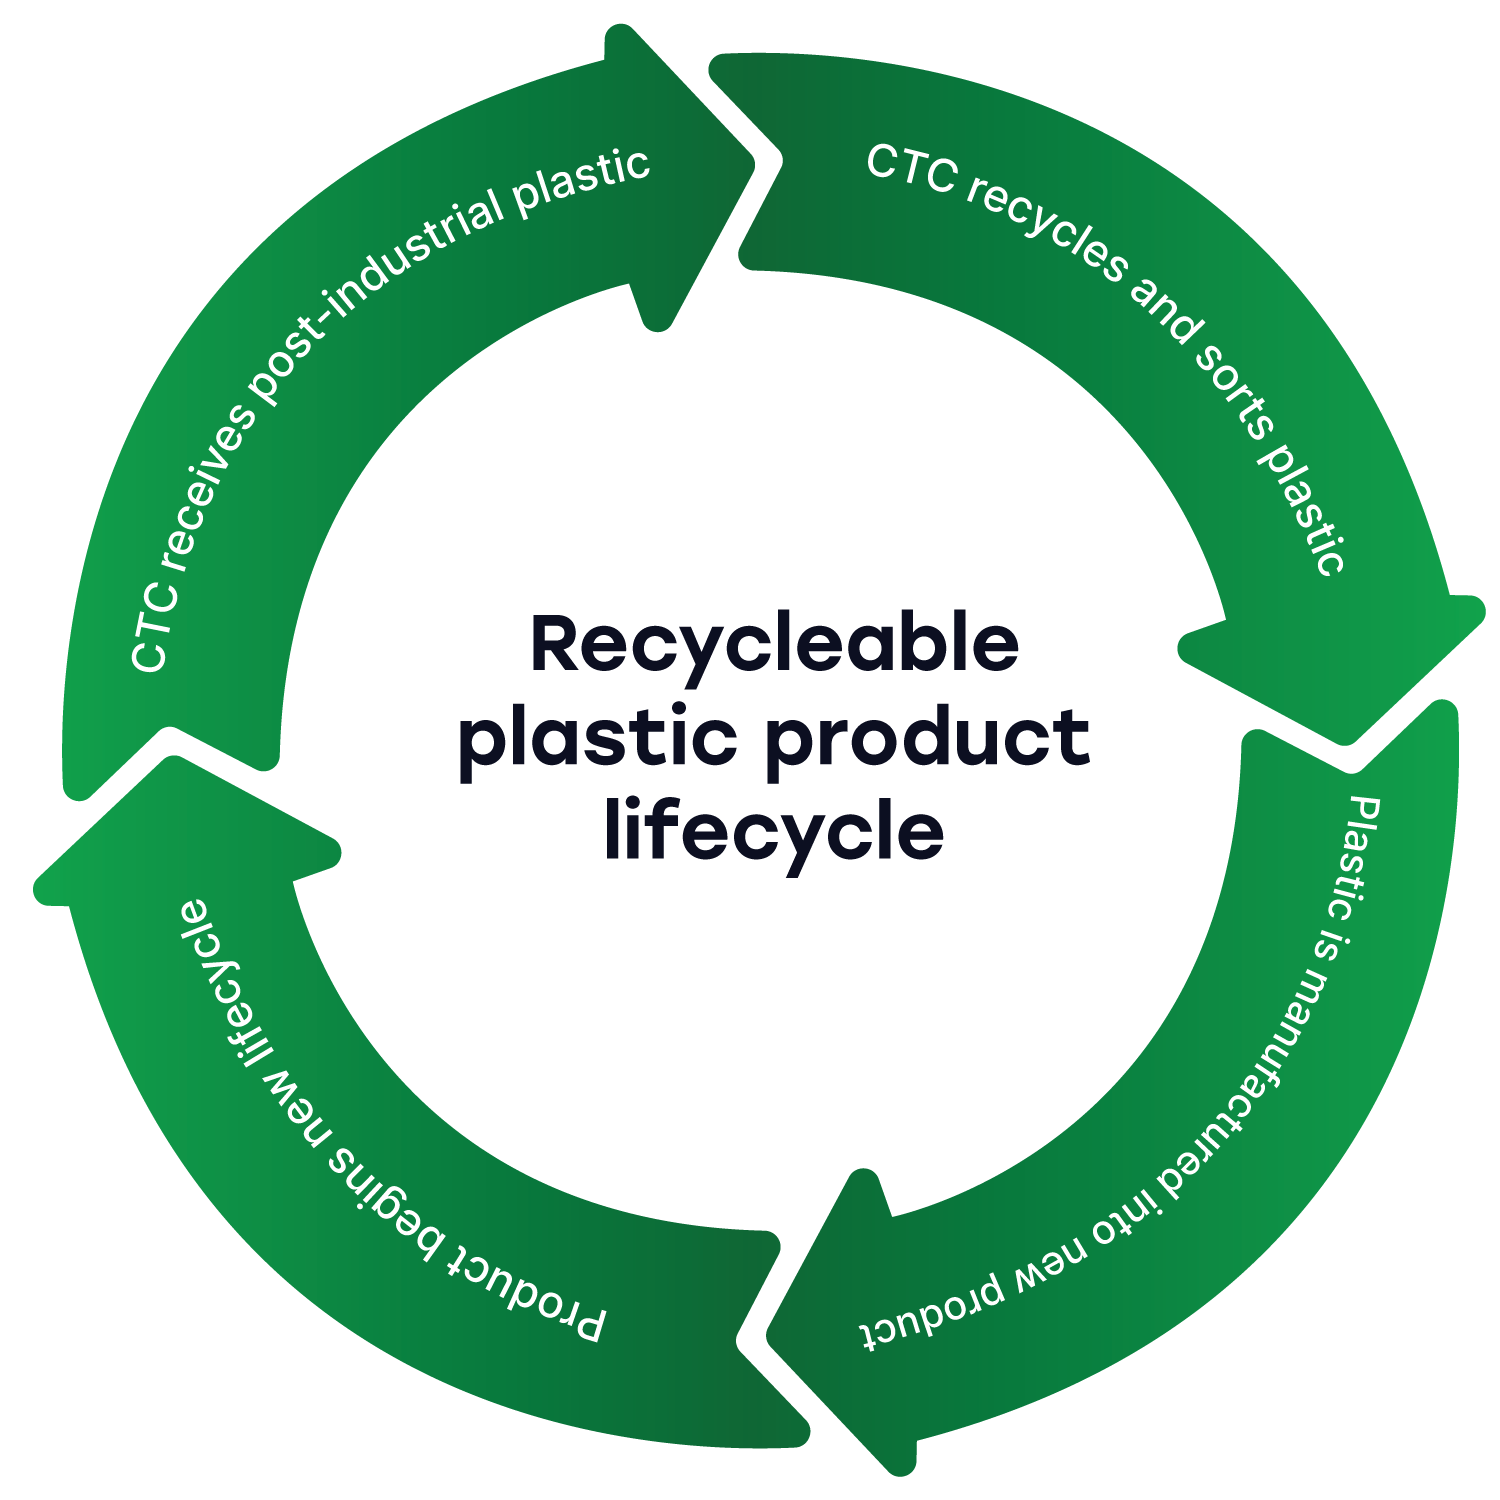 Recycleable plastic product lifecycle